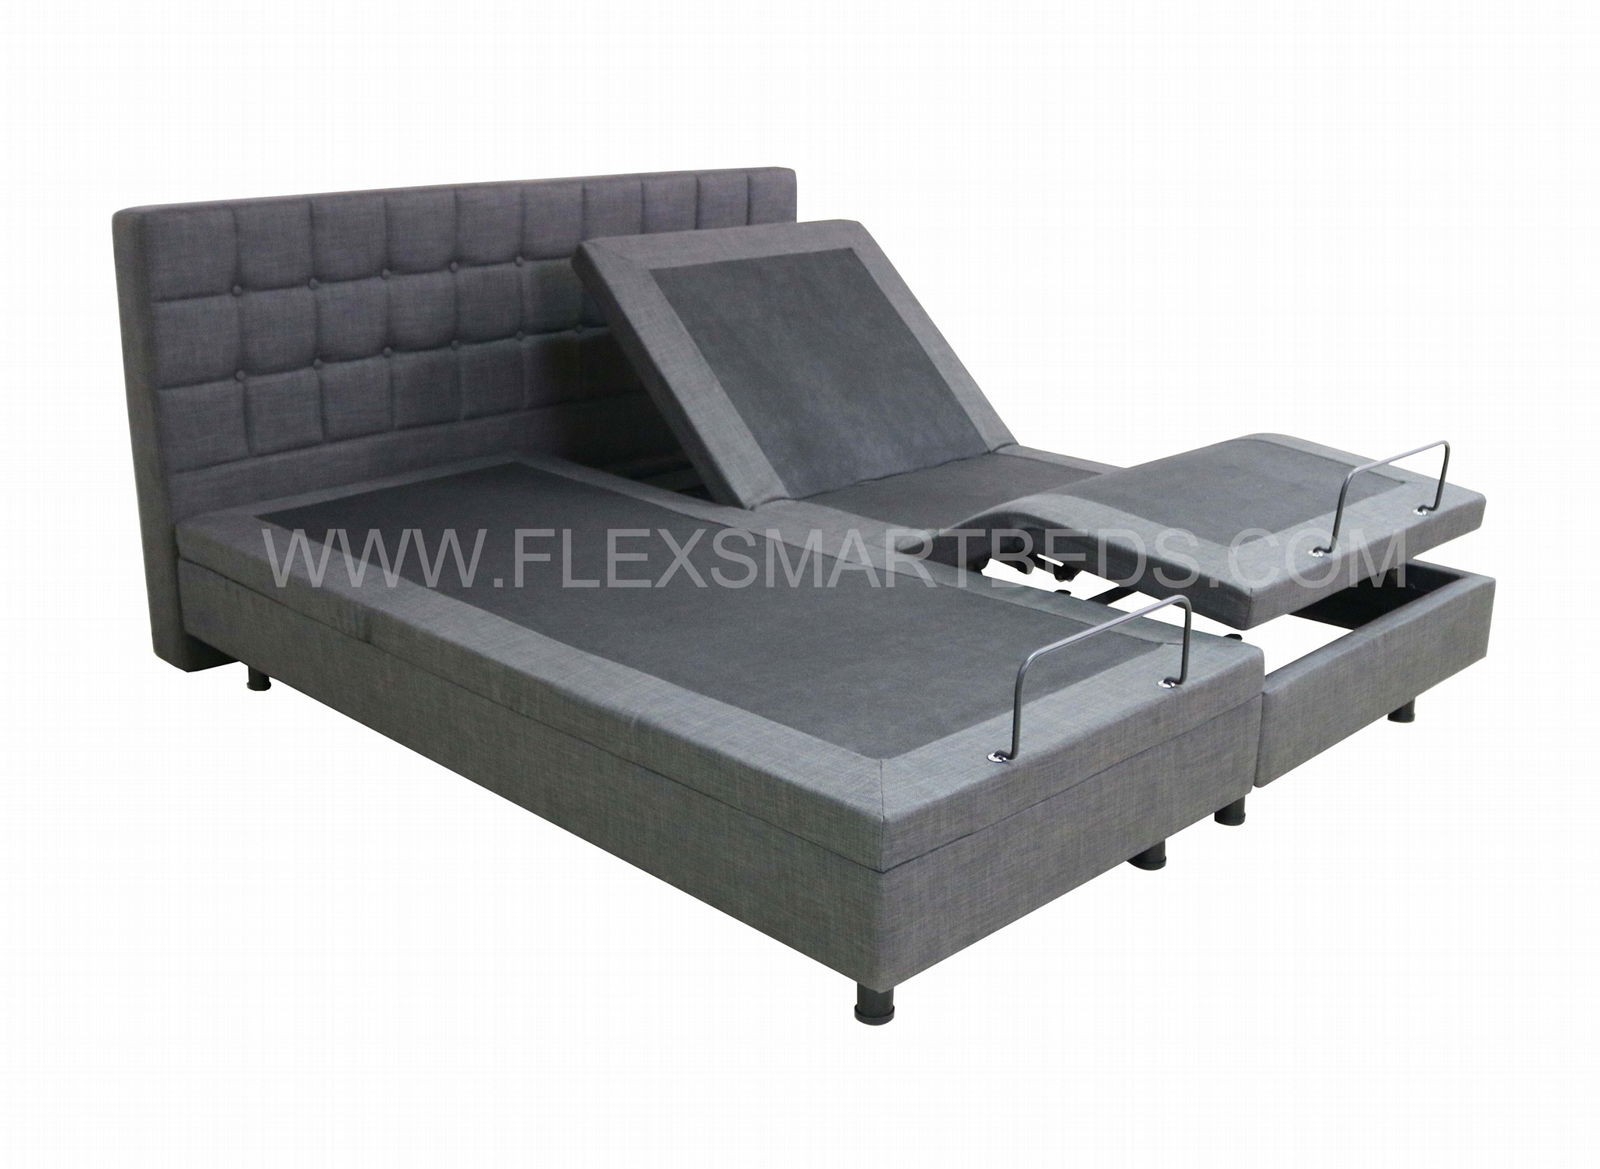 Adjustable Beds for Home Use 2